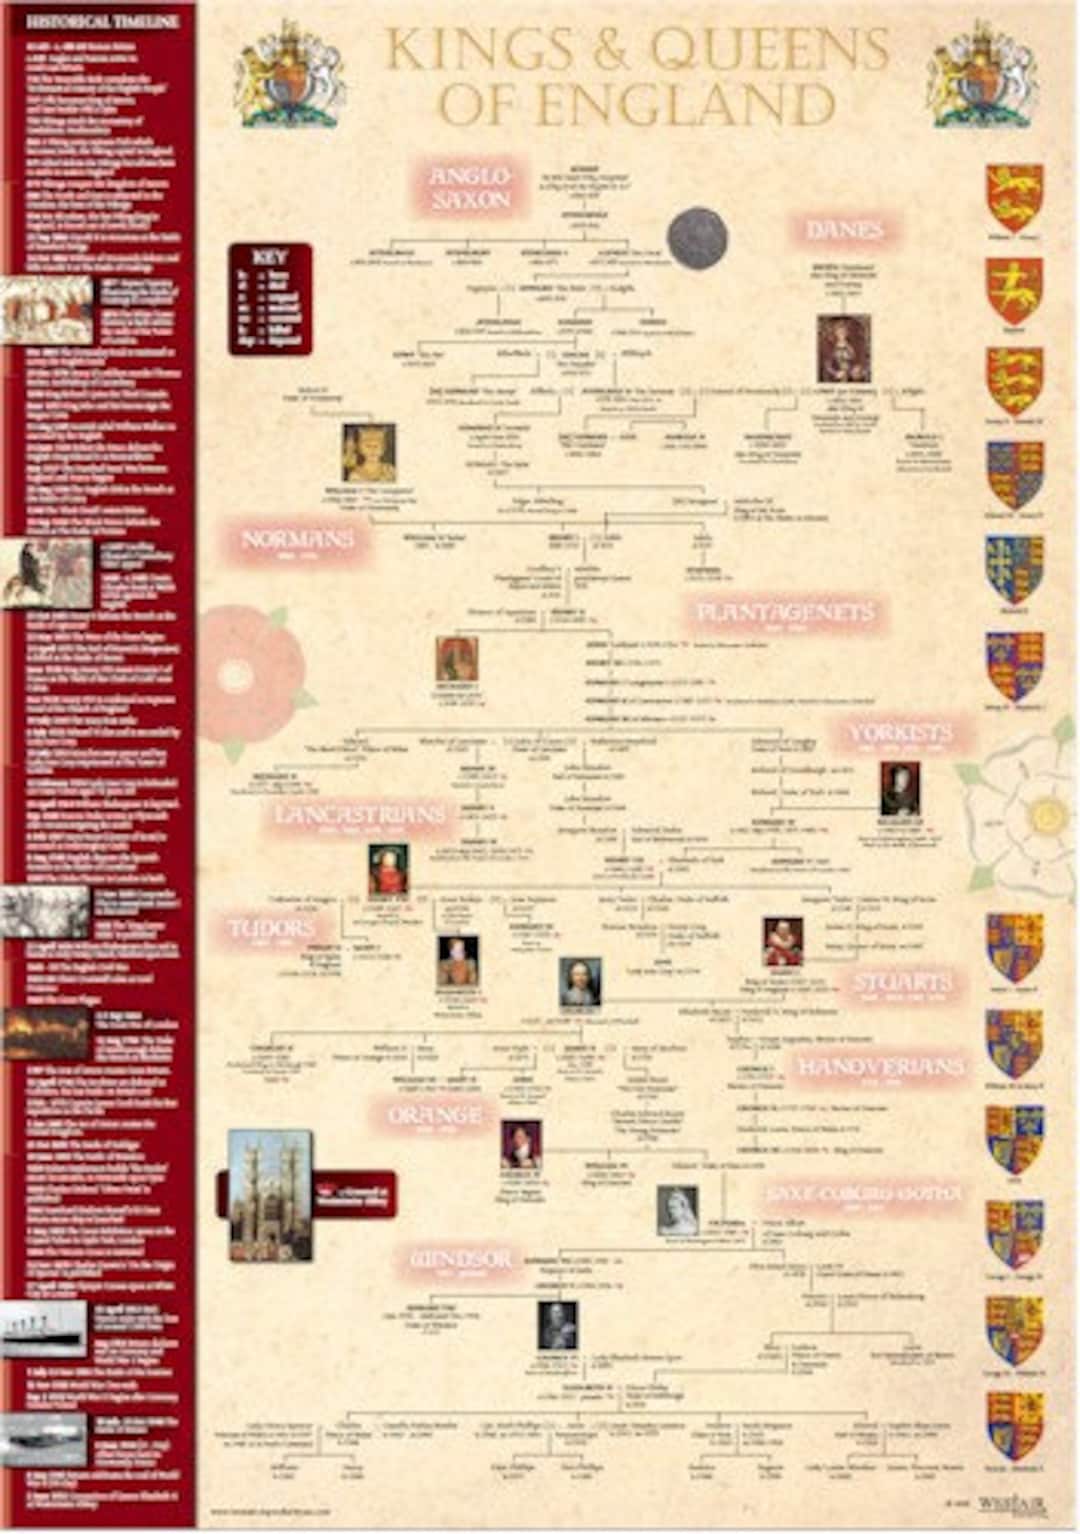 Kings and Queens of England Timeline England Kings Queens royalfamily Timeline History